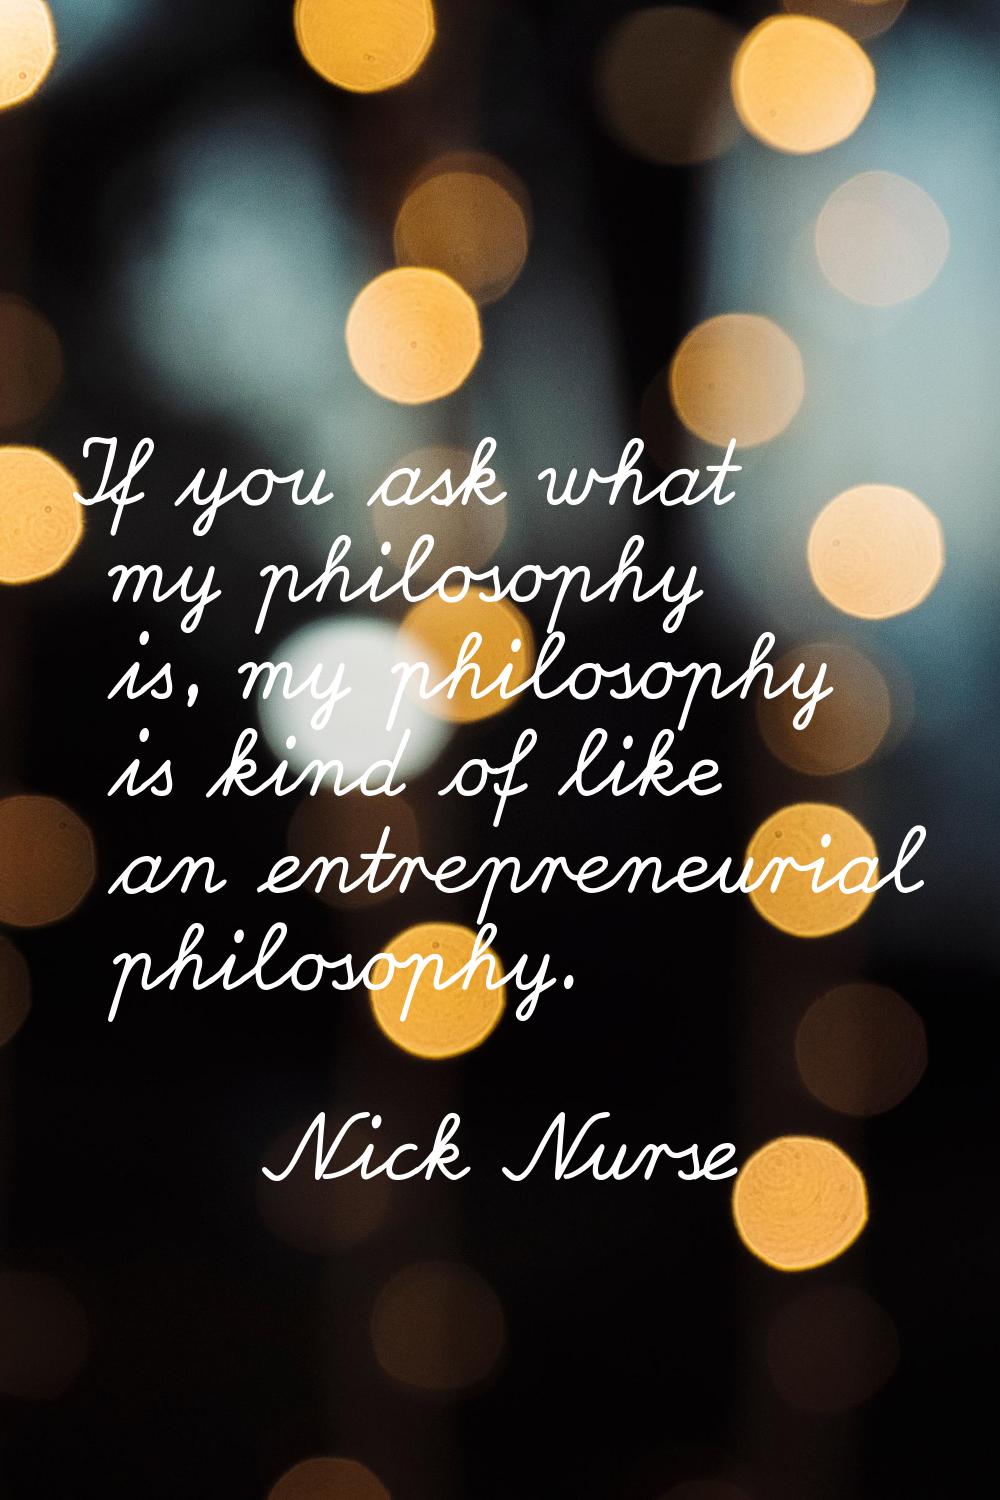 If you ask what my philosophy is, my philosophy is kind of like an entrepreneurial philosophy.